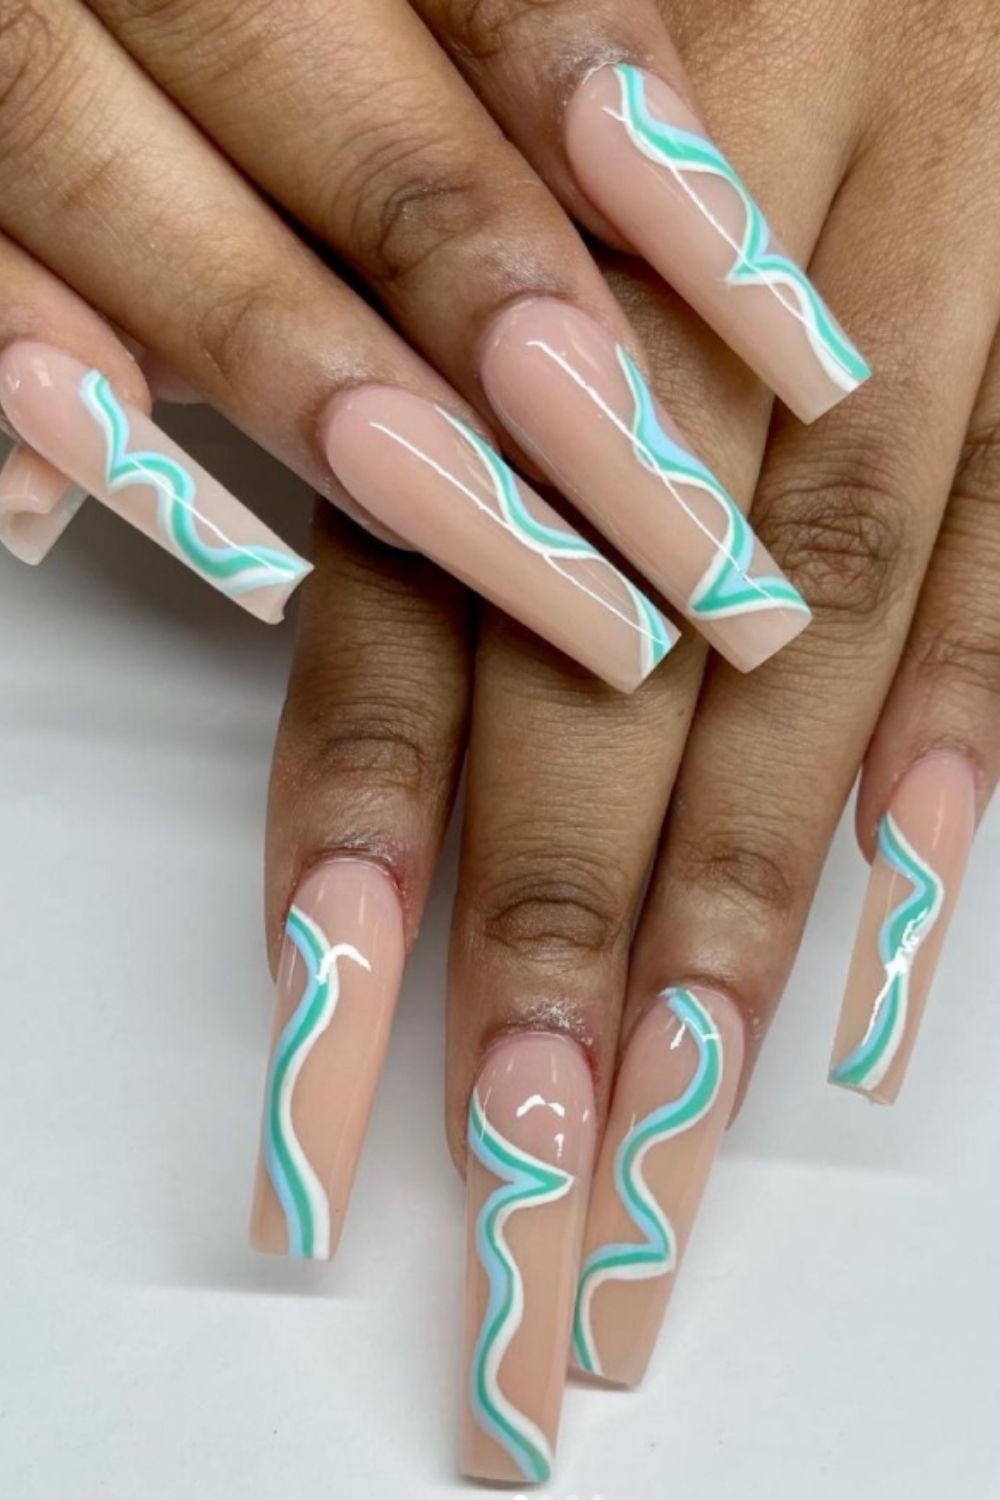 45 Stunning Coffin Nails Design Ideas For Summer nails 2021